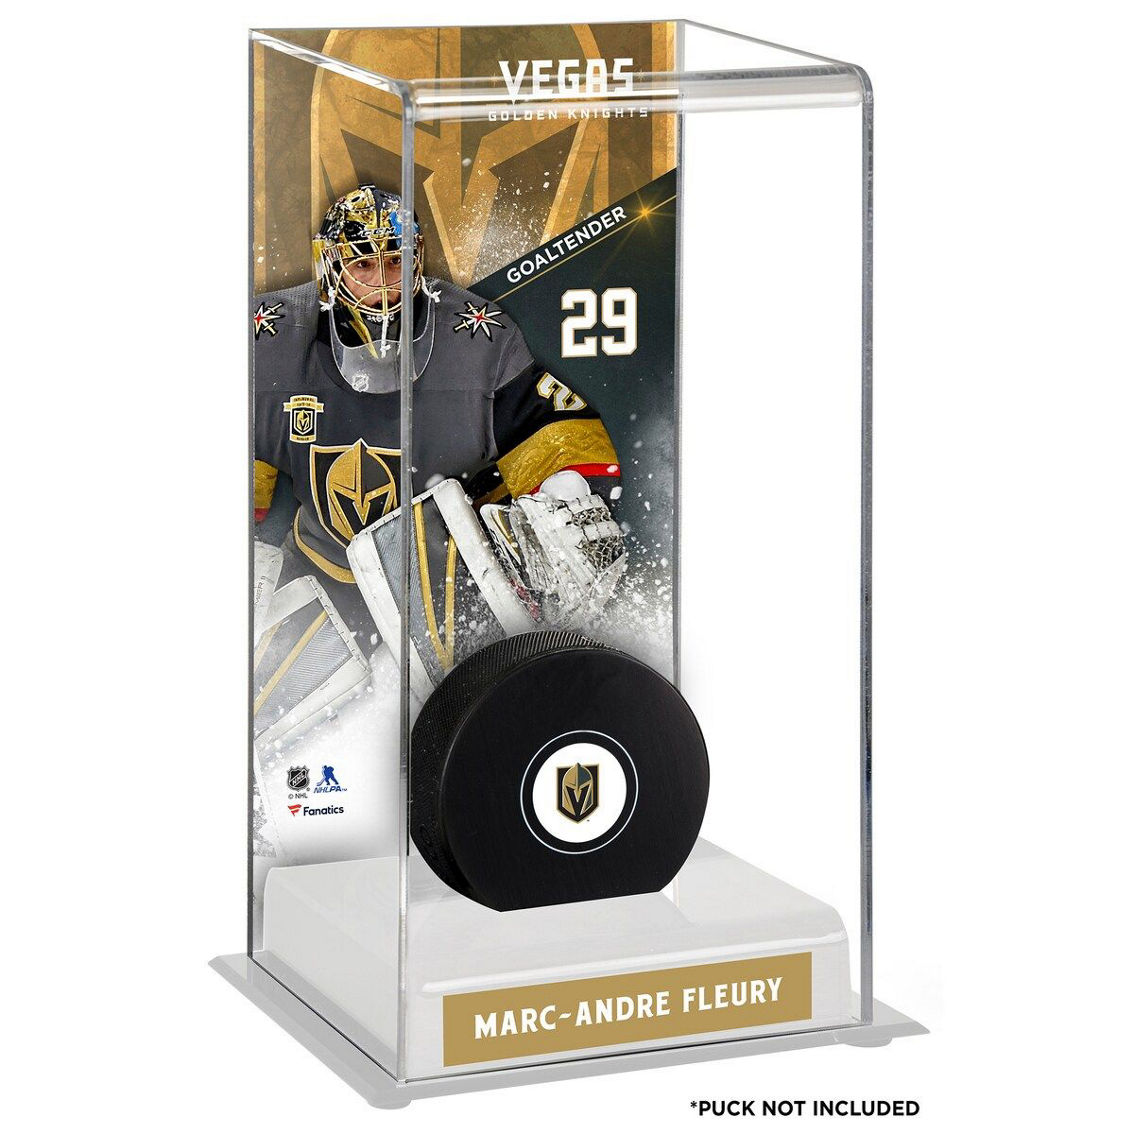 Fanatics Authentic Marc-Andre Fleury Vegas Golden Knights Deluxe Tall Hockey Puck Case - Image 2 of 2